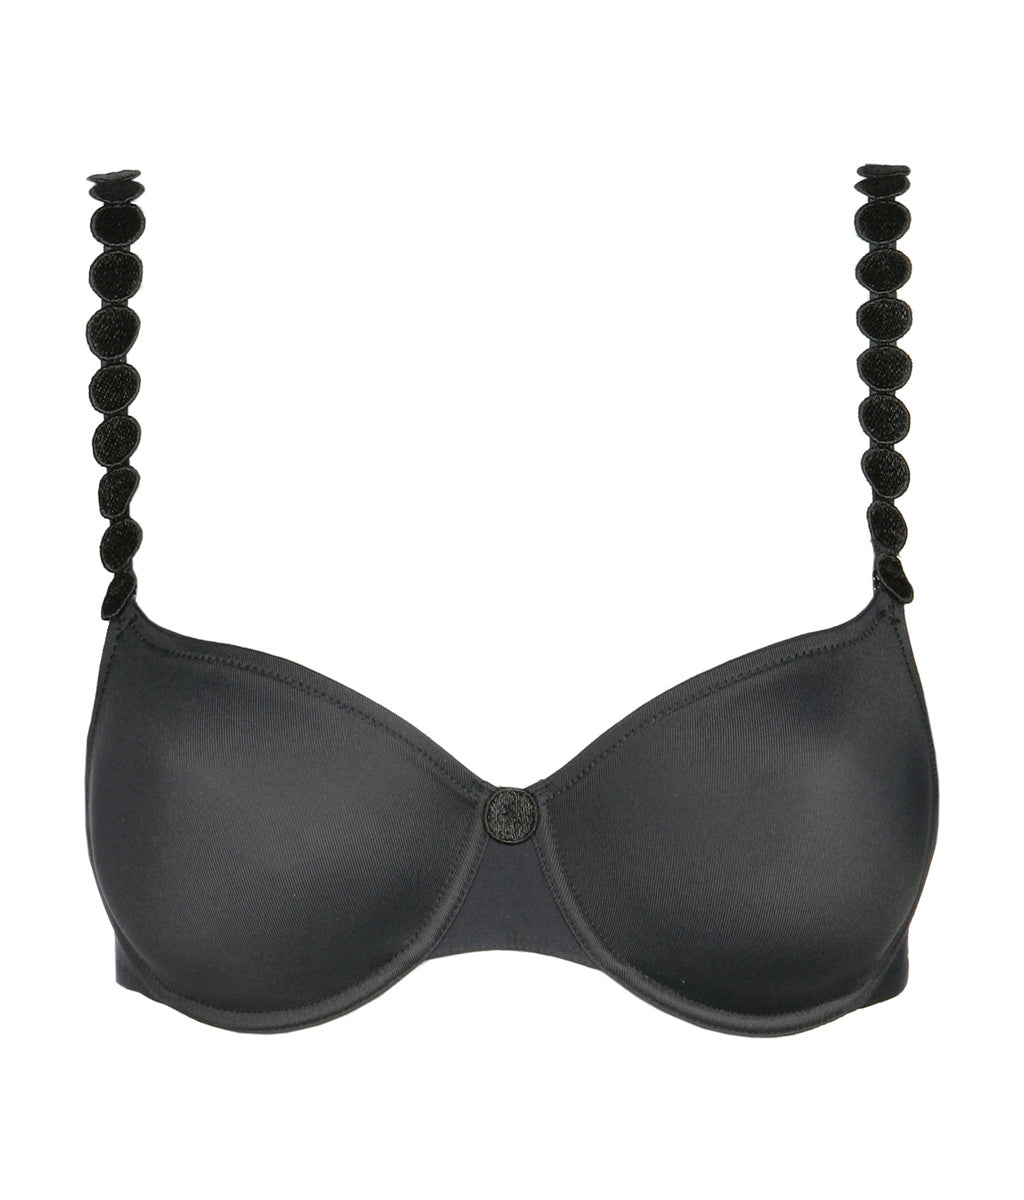 L'Aventure 'Tom' (Charcoal) Moulded Multiway Full Cup Bra BC - Sandra Dee - Product Shot - Front